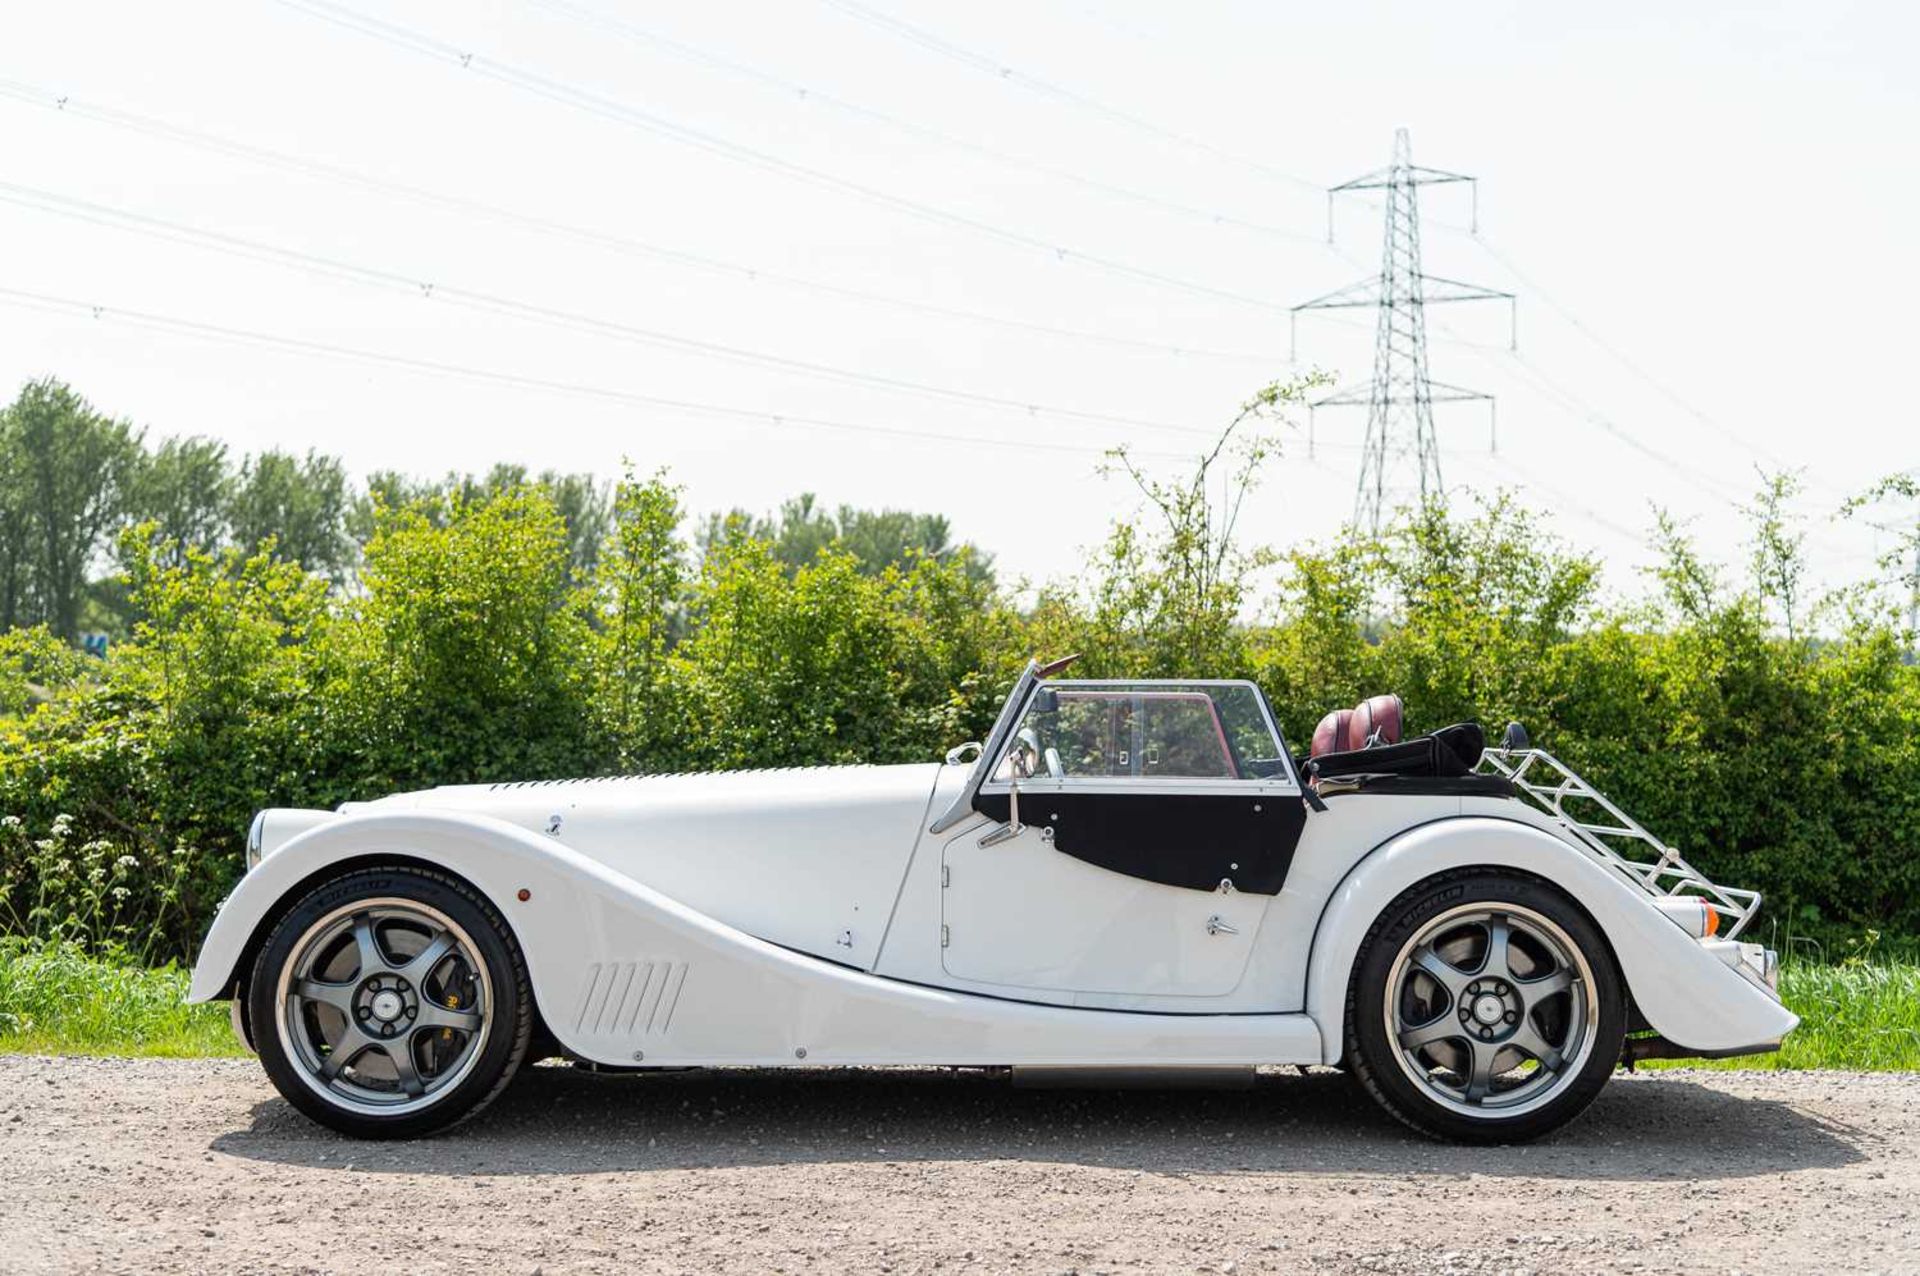 2012 Morgan Plus 8 ***NO RESERVE*** Believed to be one of just 60 produced and with MOT records supp - Image 20 of 74